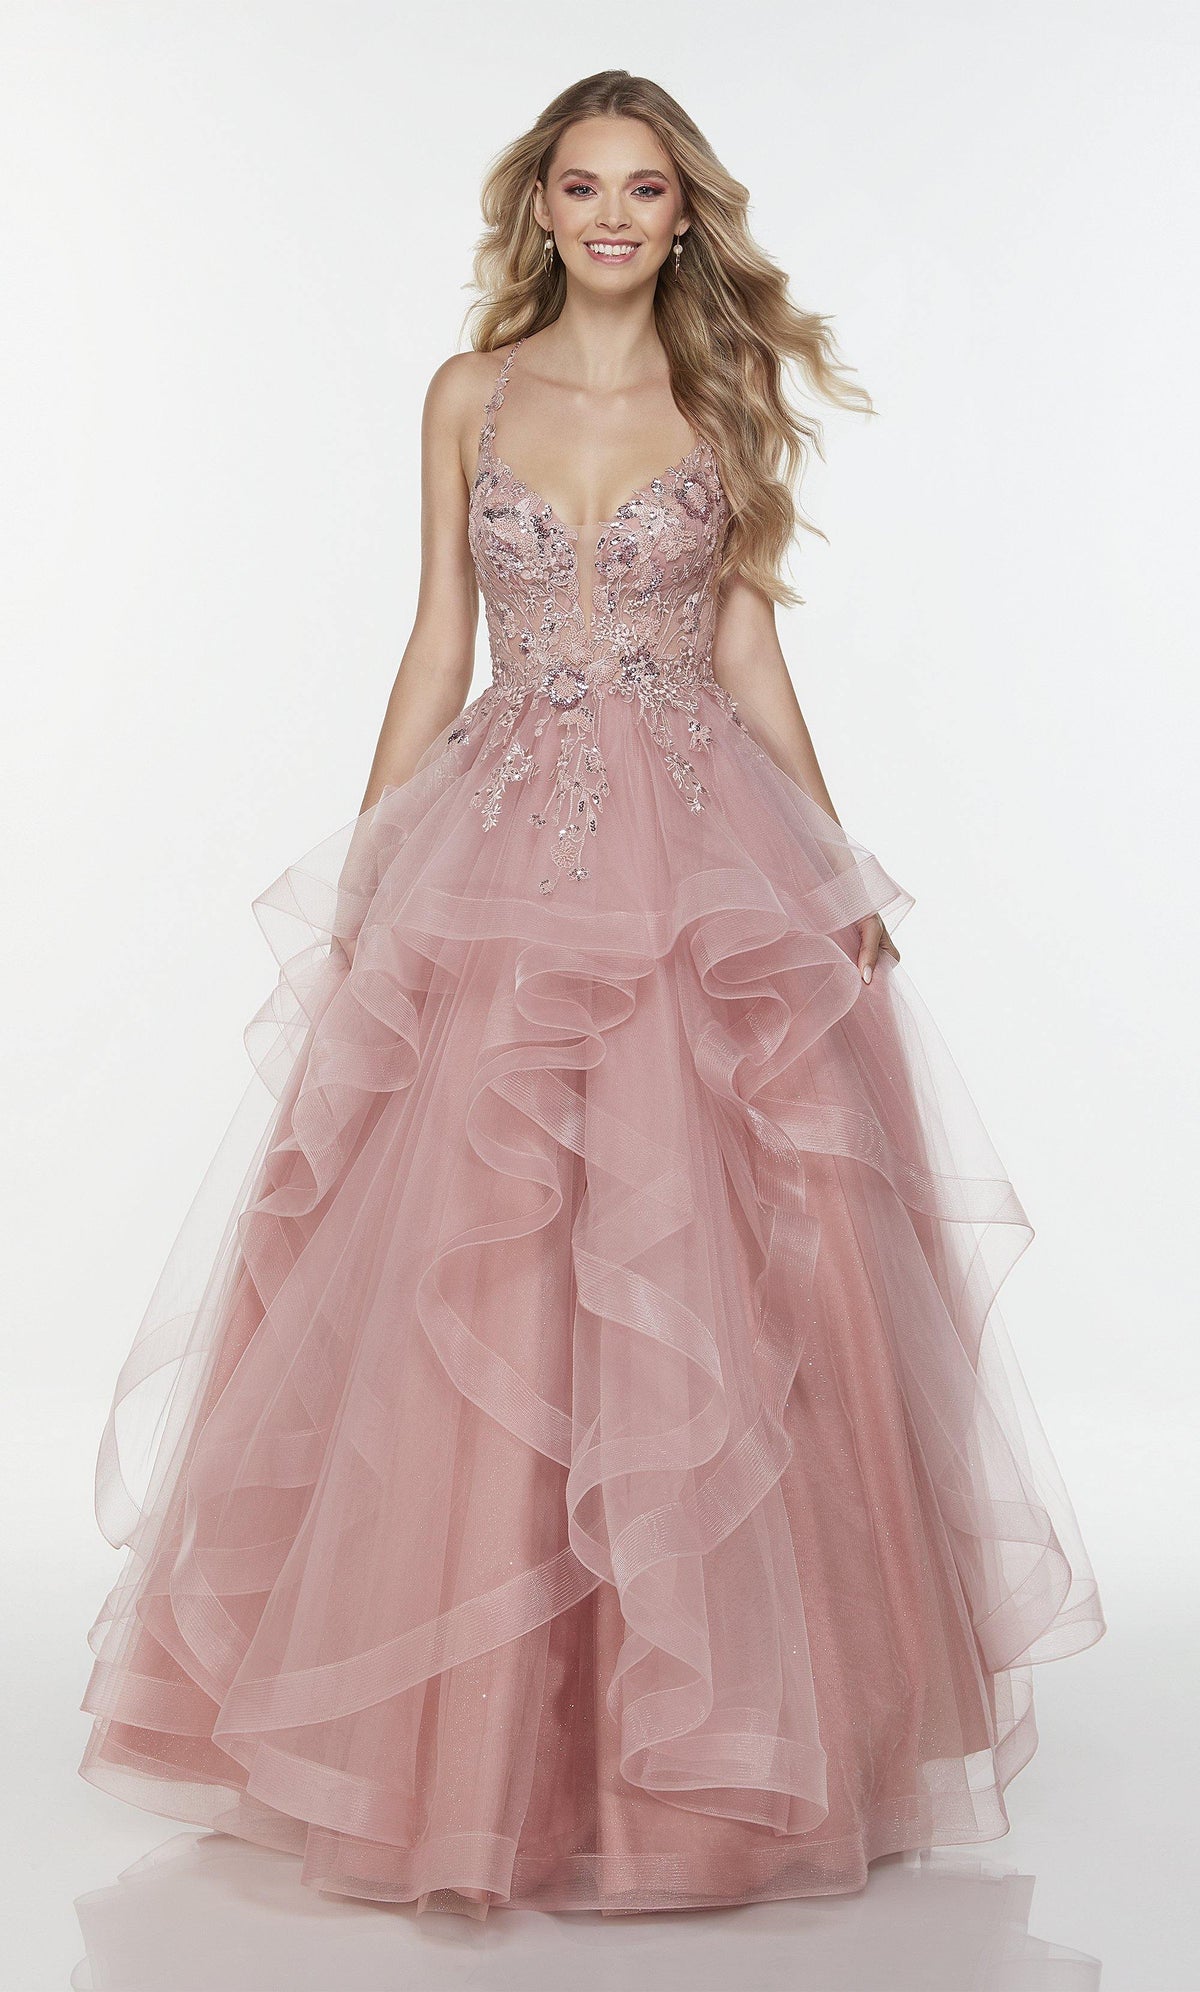 Pink prom dress with a plunging neckline, sheer bodice, layered tulle skirt, and lace appliques.